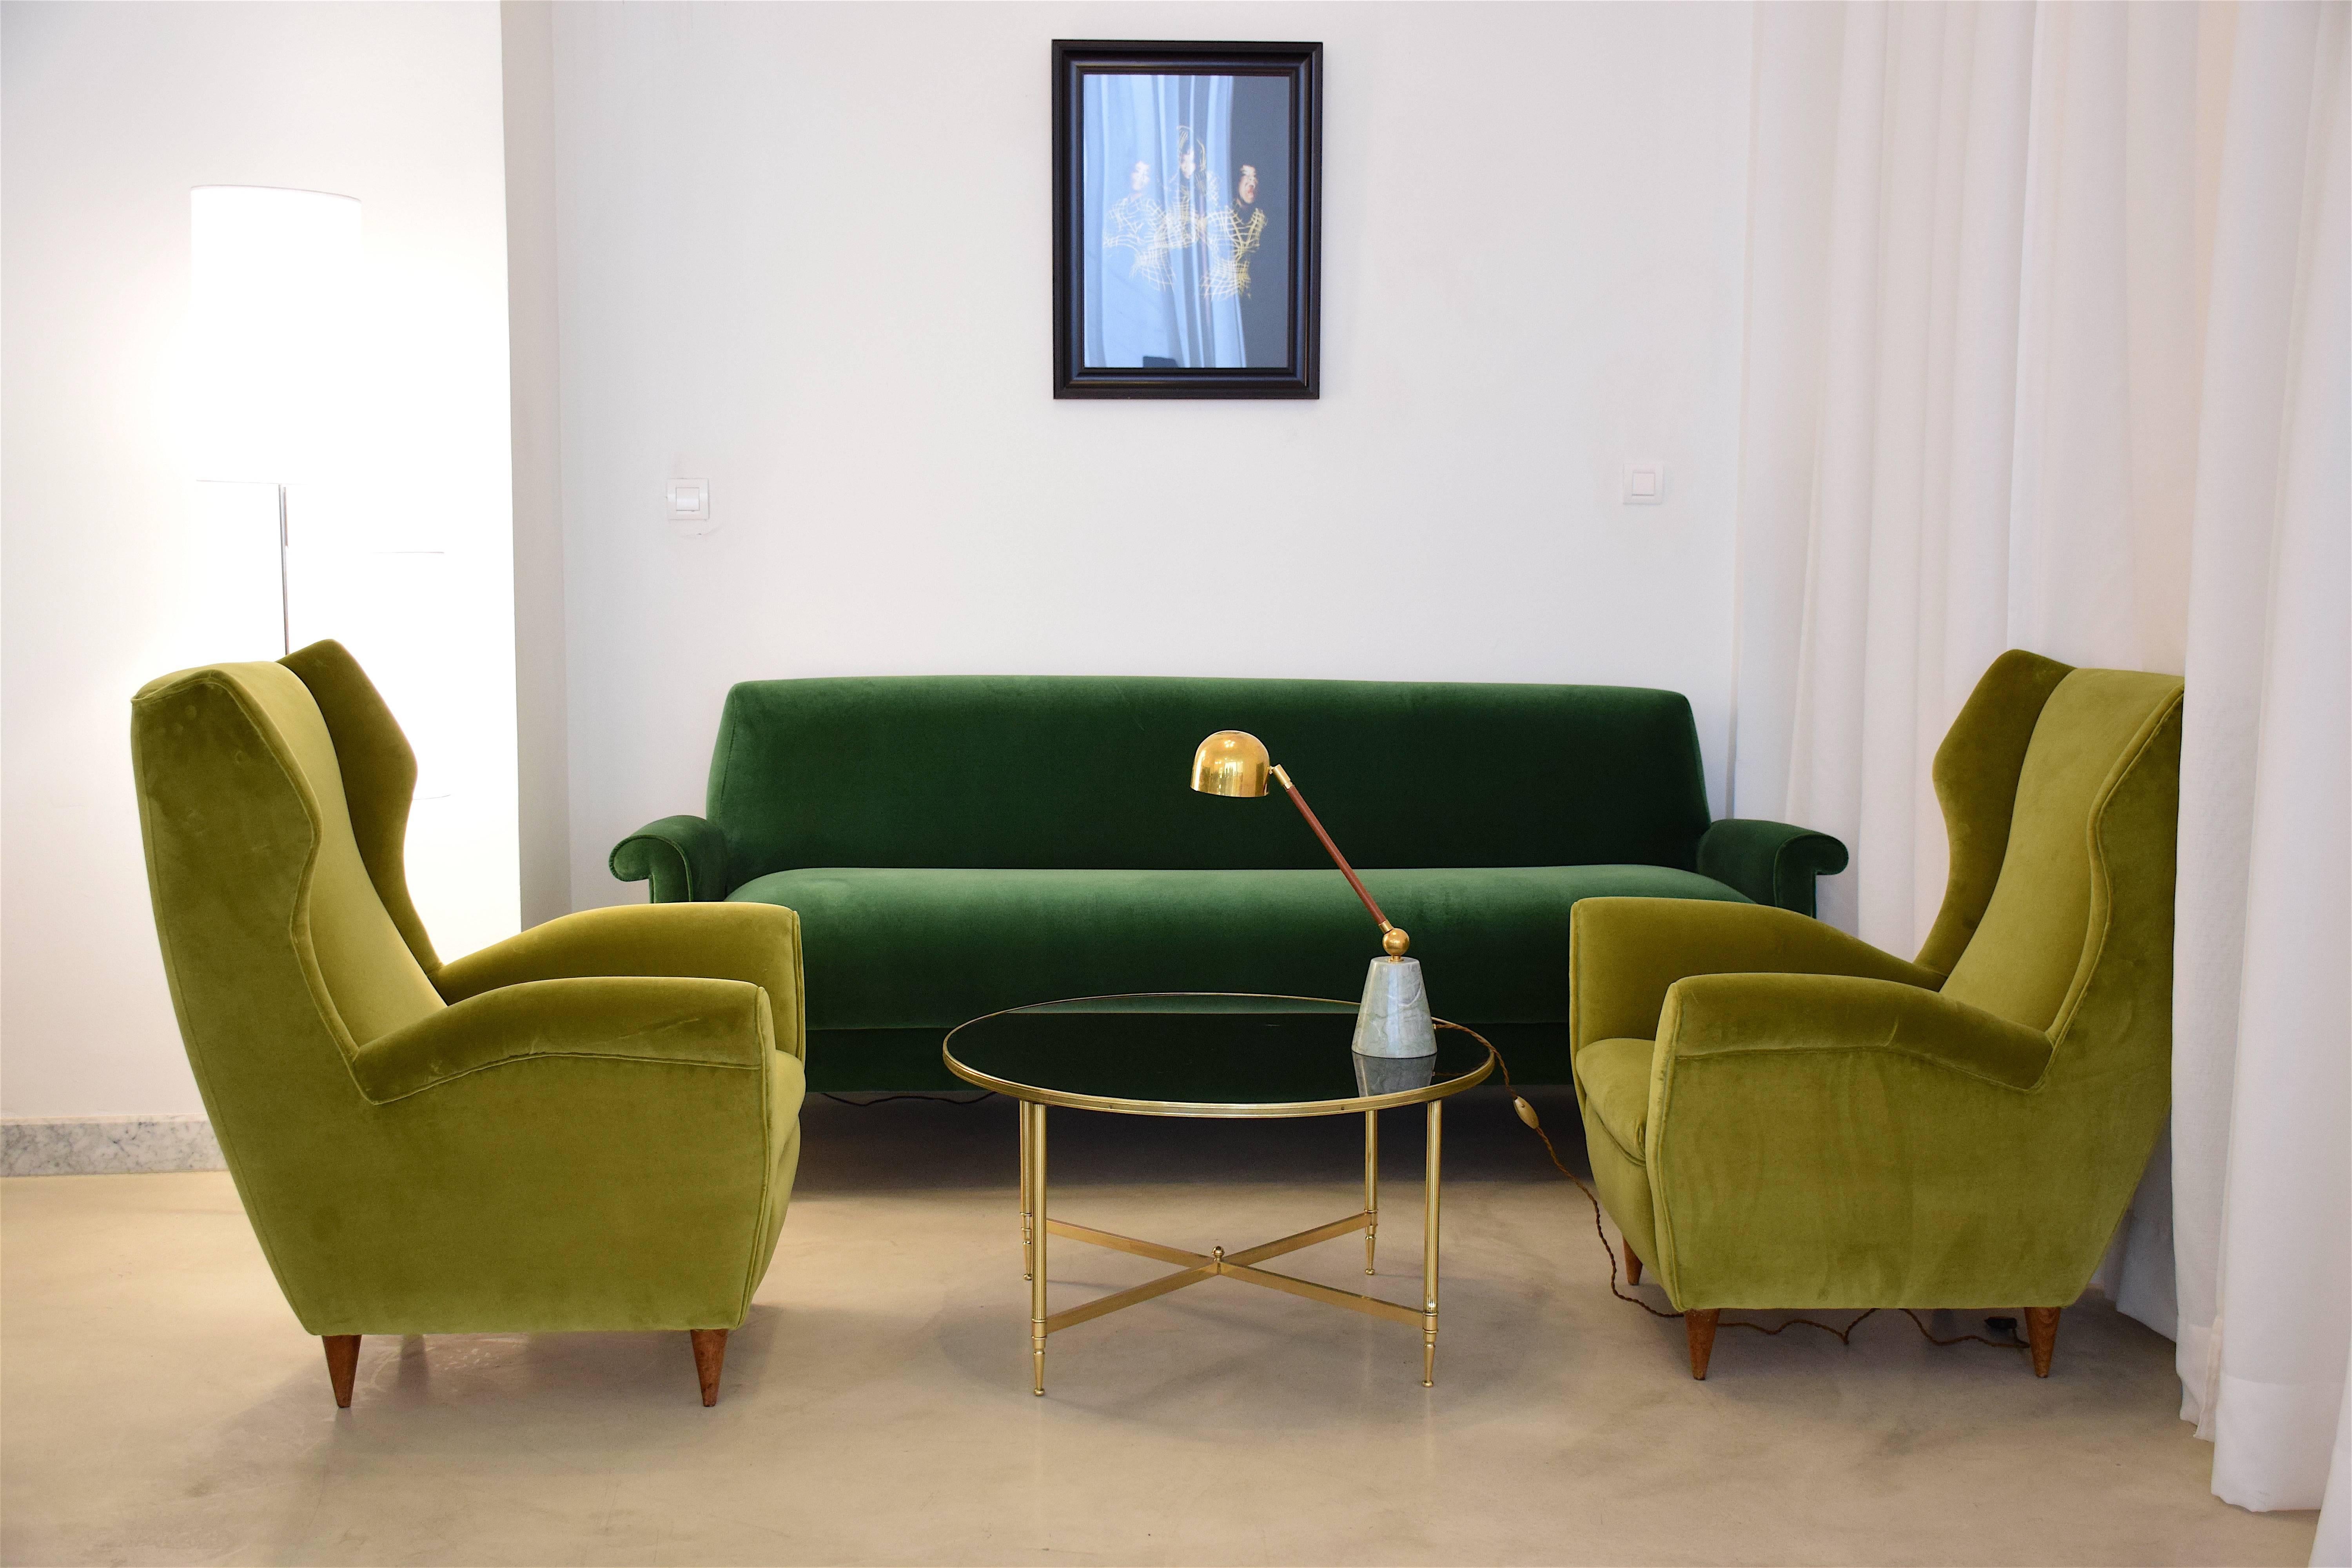 Vibrant sofa from Italy circa 1950-1960s has been meticulously restored with Lelièvre Paris forest green velvet upholstery, one of the highest quality fabric makers in France and new foam padding. The splayed steel legs have deliberately been left